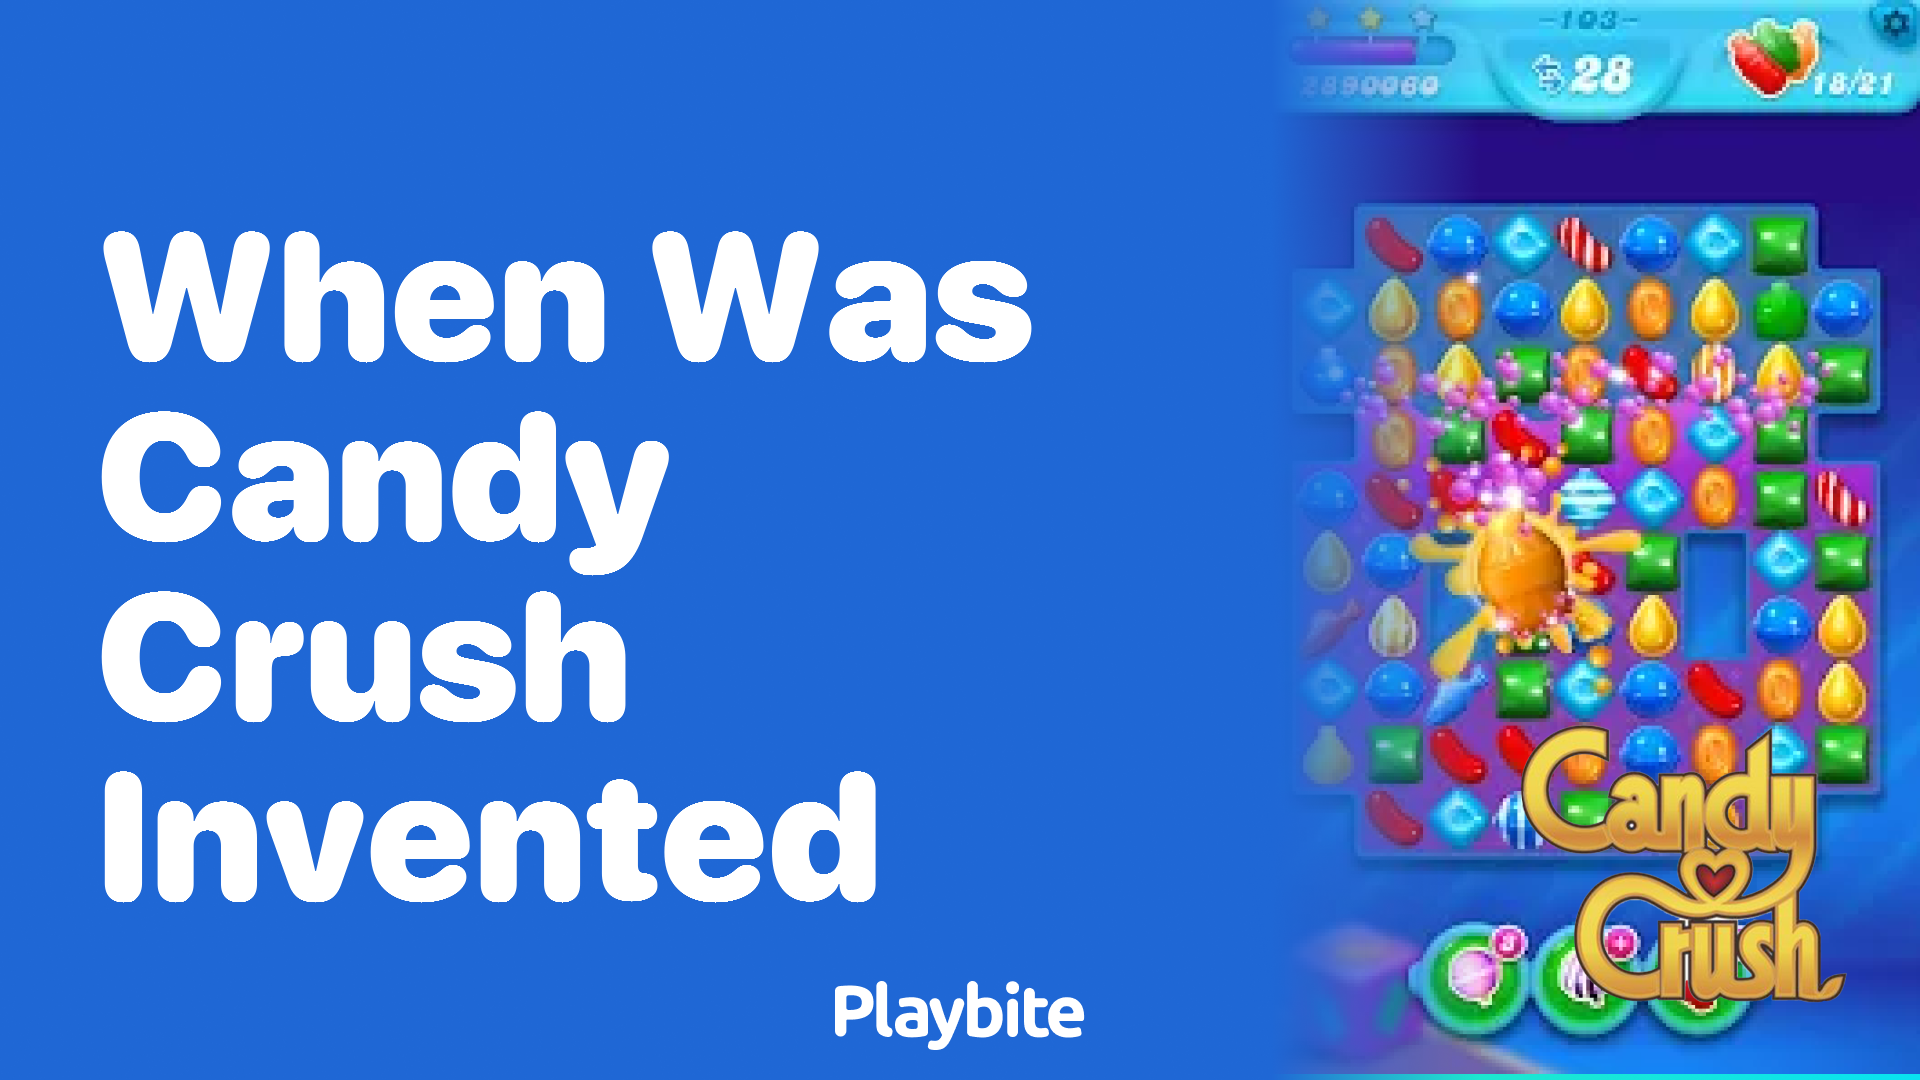 When Was Candy Crush Invented?